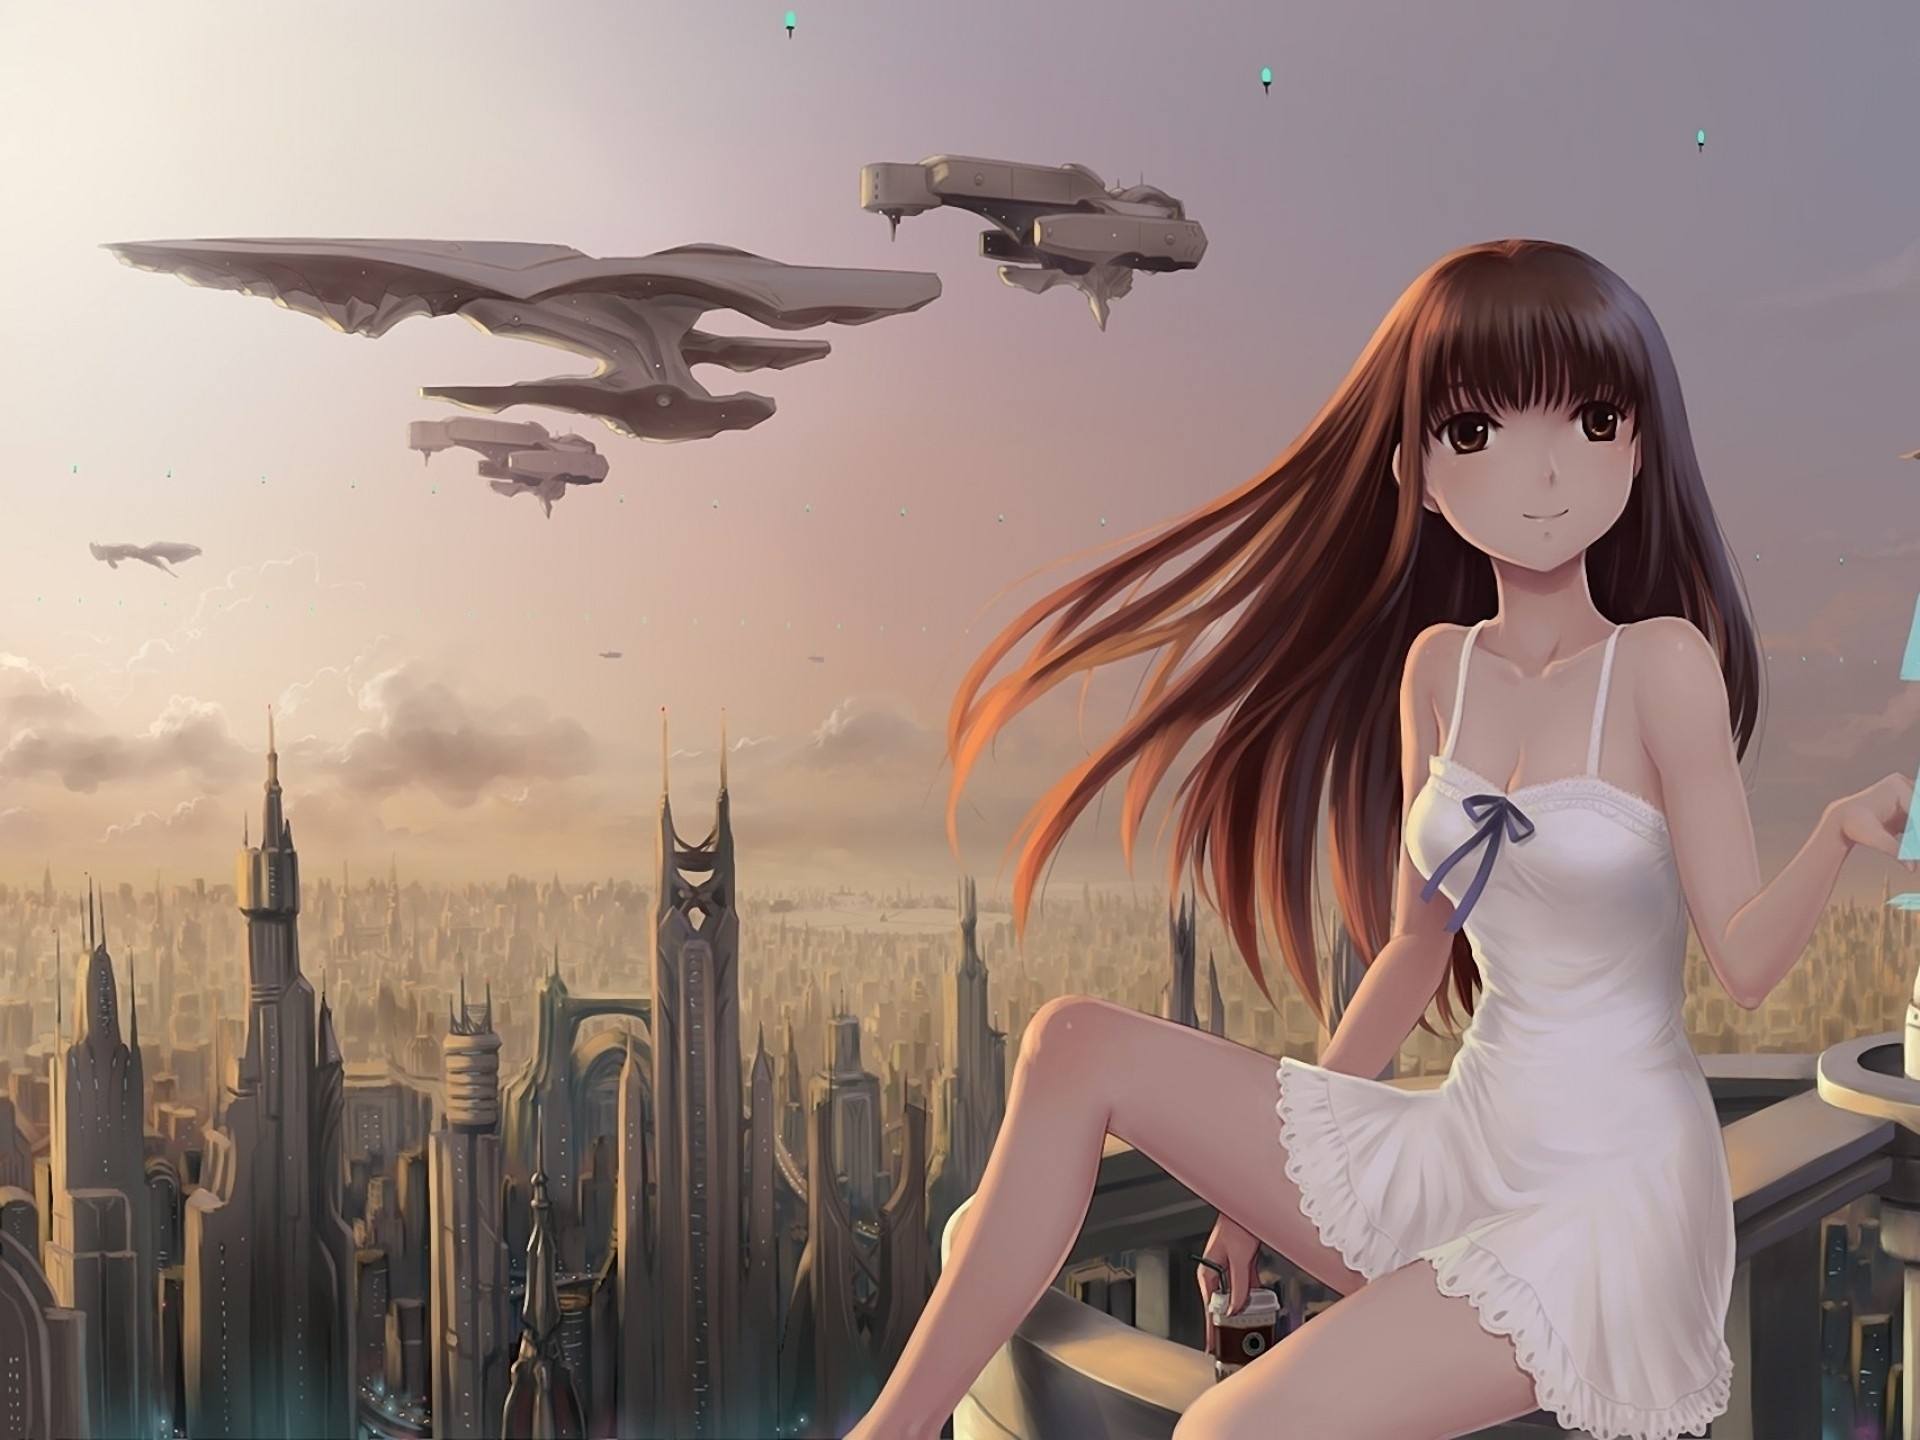 brunettes, Clouds, Cityscapes, Dress, Futuristic, Long, Hair, Brown, Eyes, Spaceships, Anime, Hair, Ribbons, Skys, Abstract, Futurism, Hd, Wallpaper Wallpaper